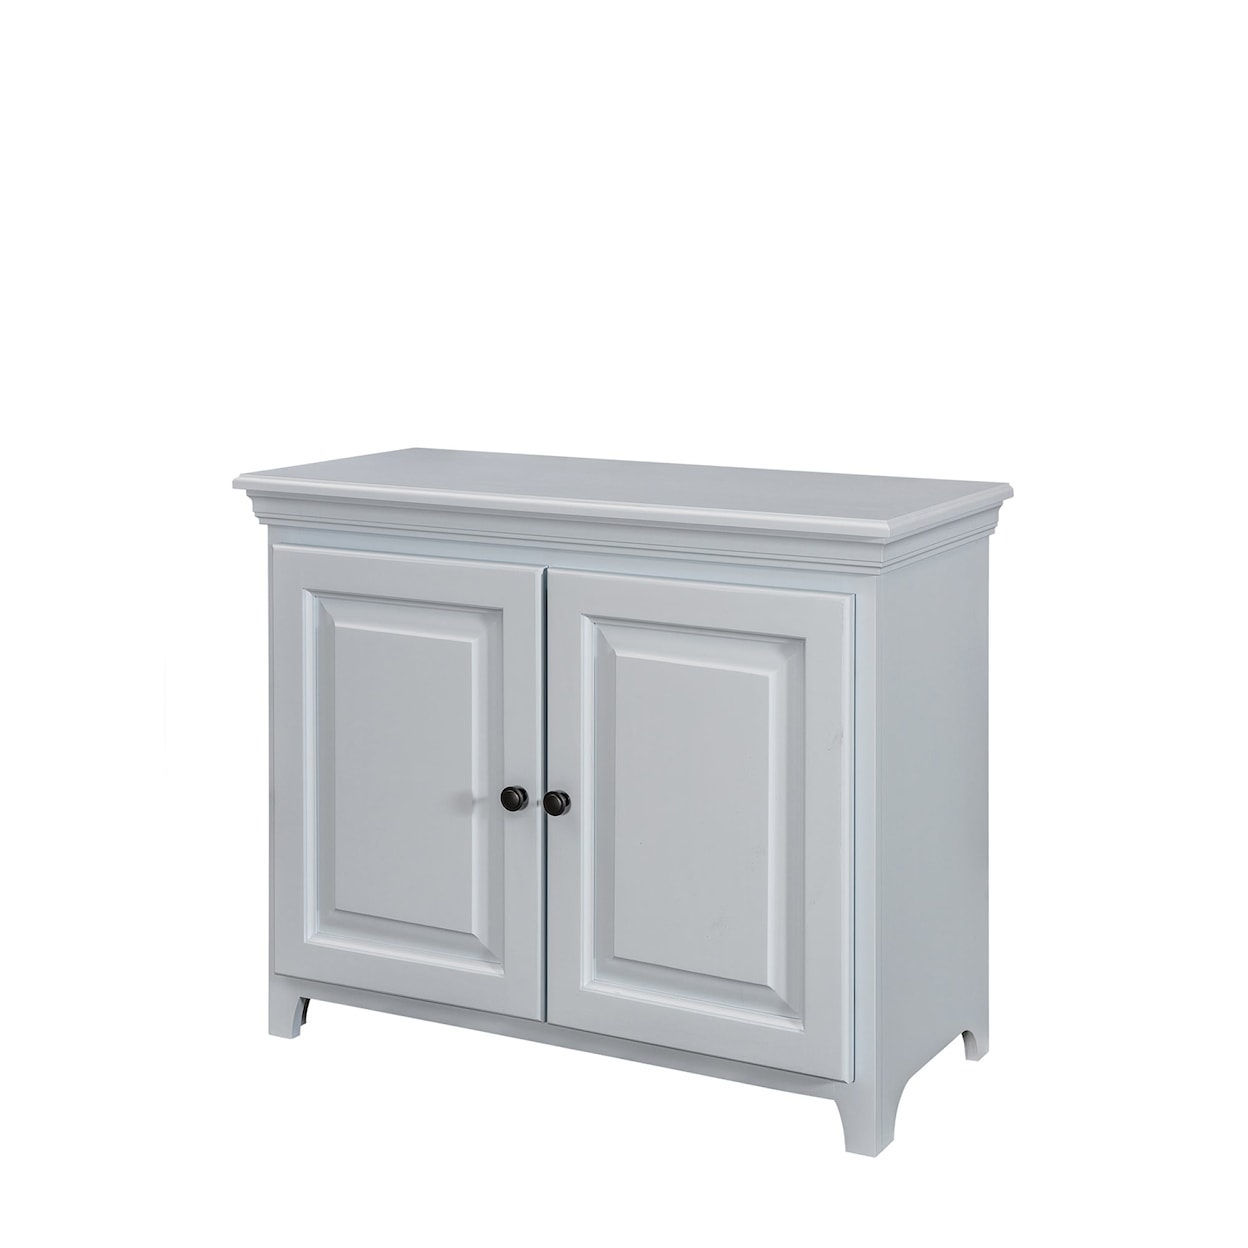 Archbold Furniture Pantries and Cabinets 2 Door Cabinet